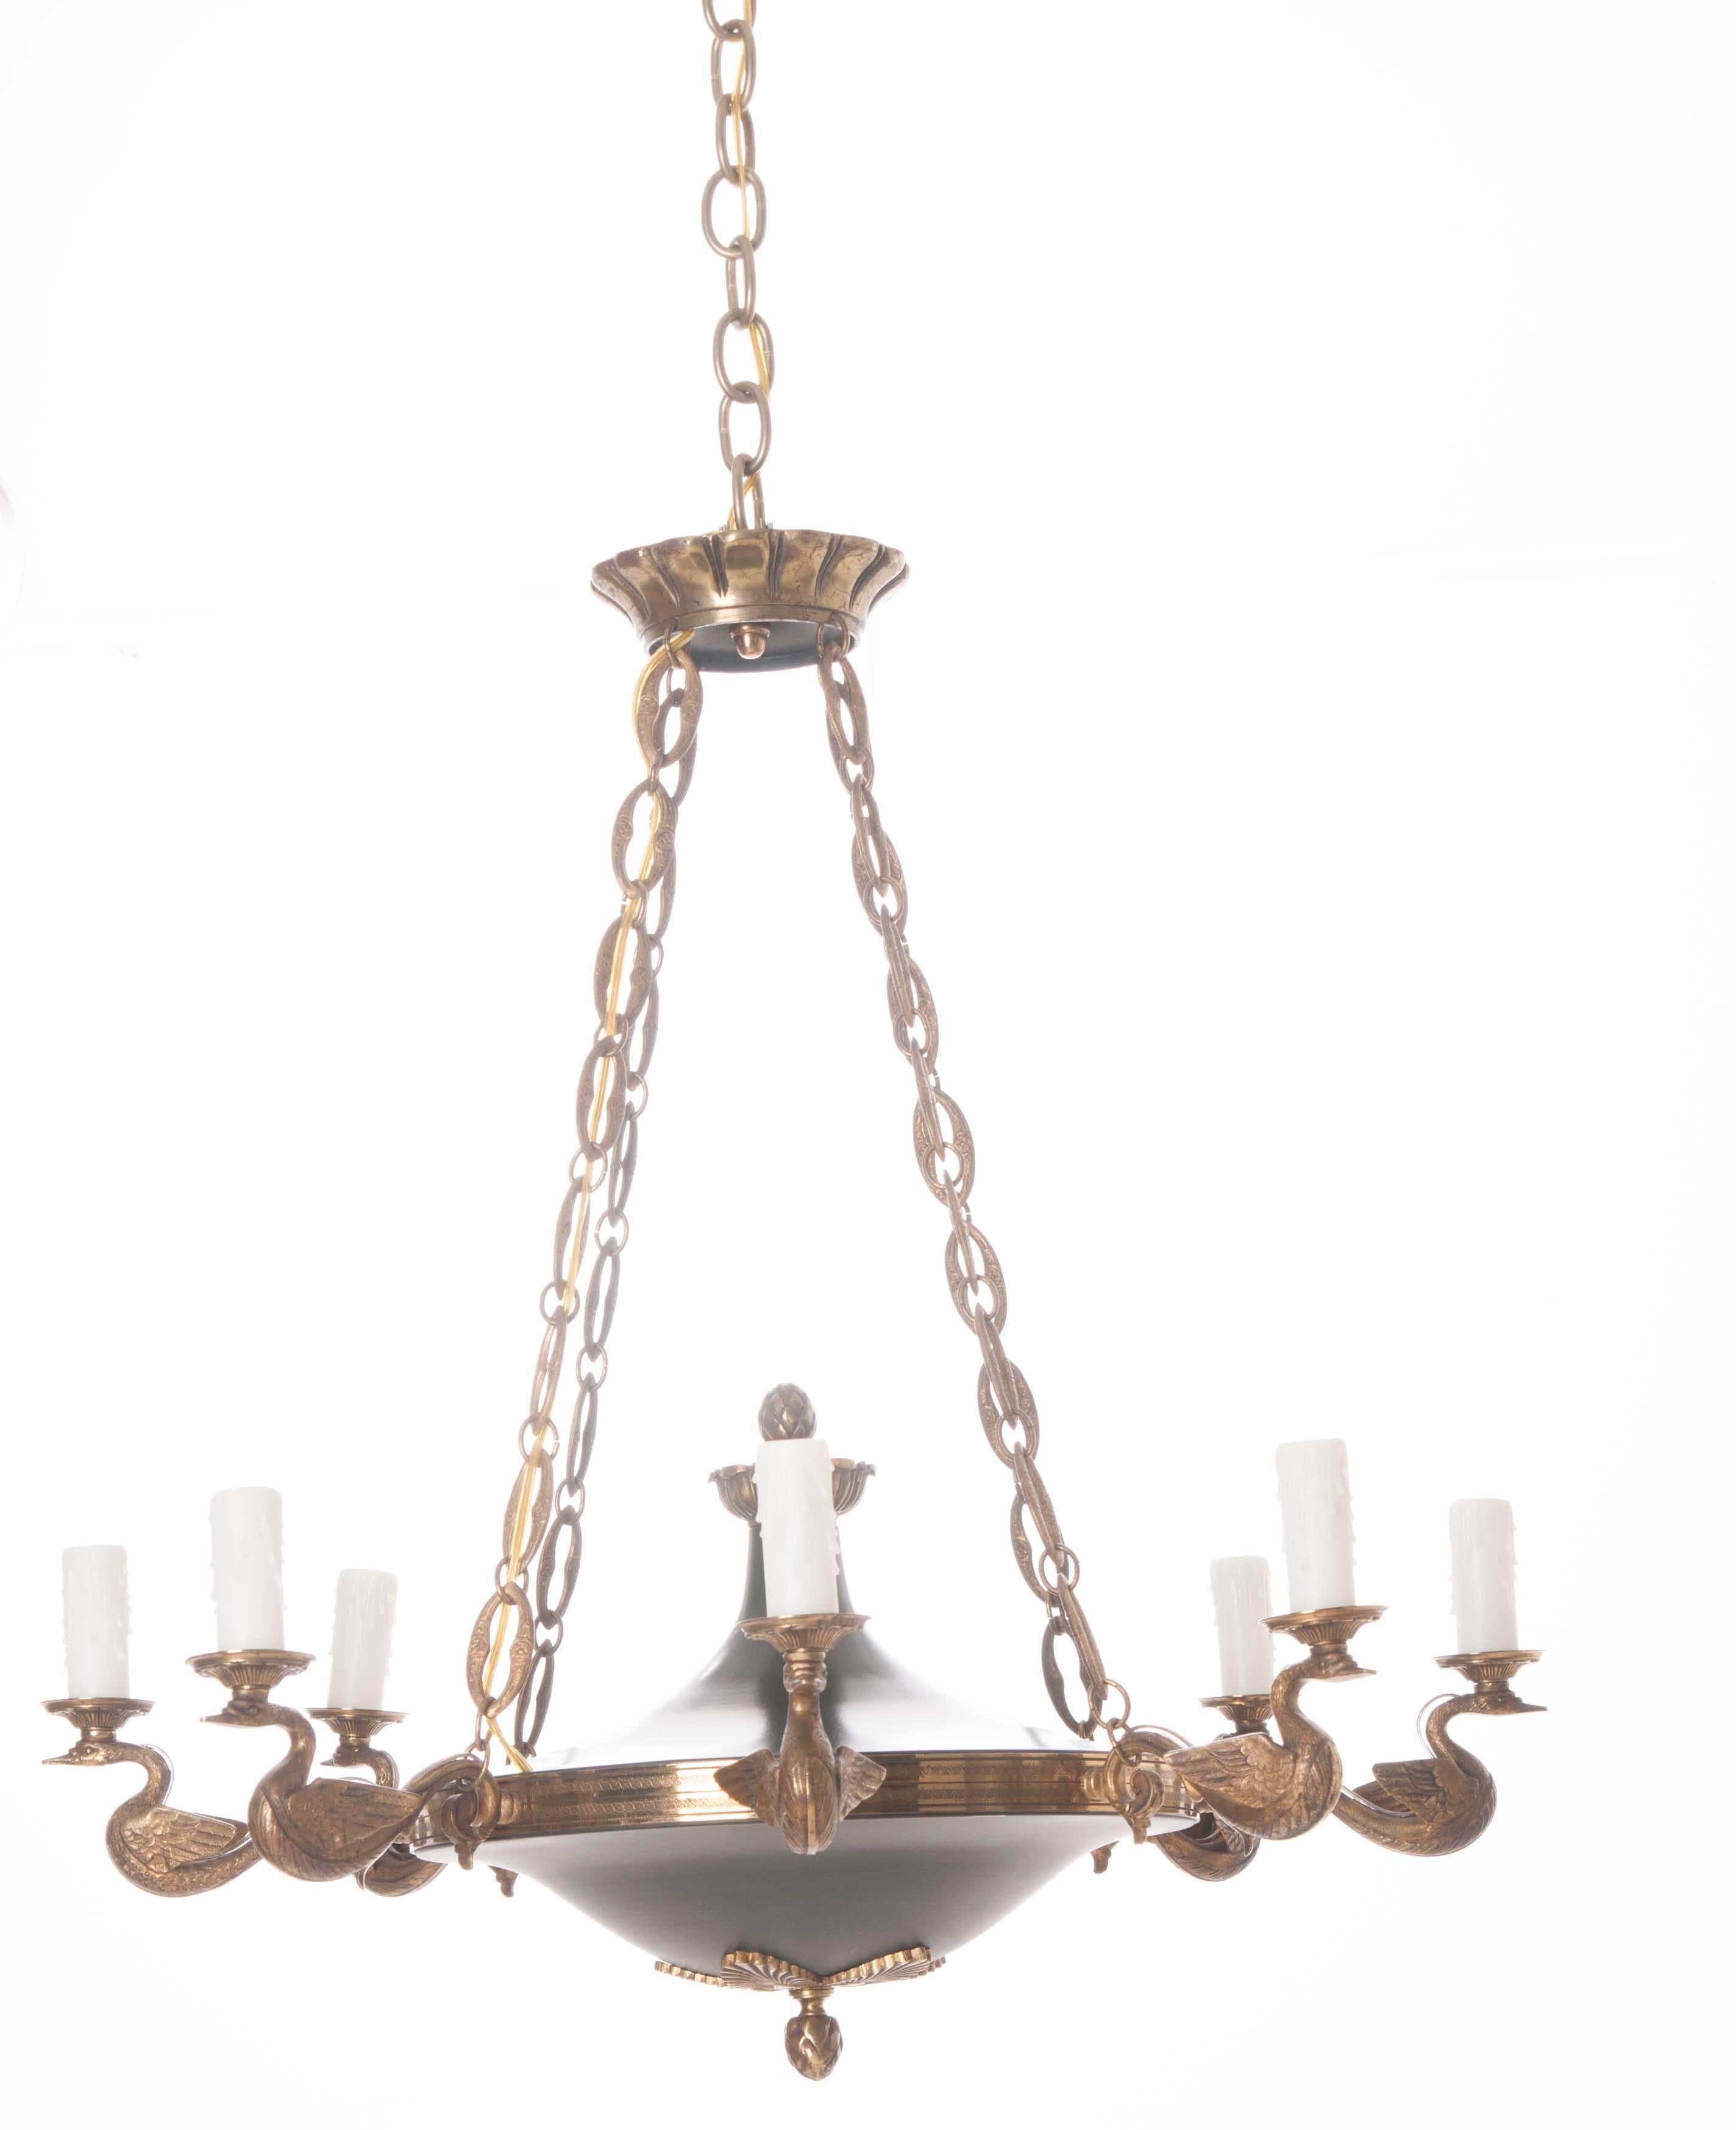 A fantastic brass eight-light chandelier from France. The eight arms are formed from beautifully detailed brass swans with brass bobeches resting on each's head. Brass artichoke finials can be found atop and below the black bottom bowl. Even the